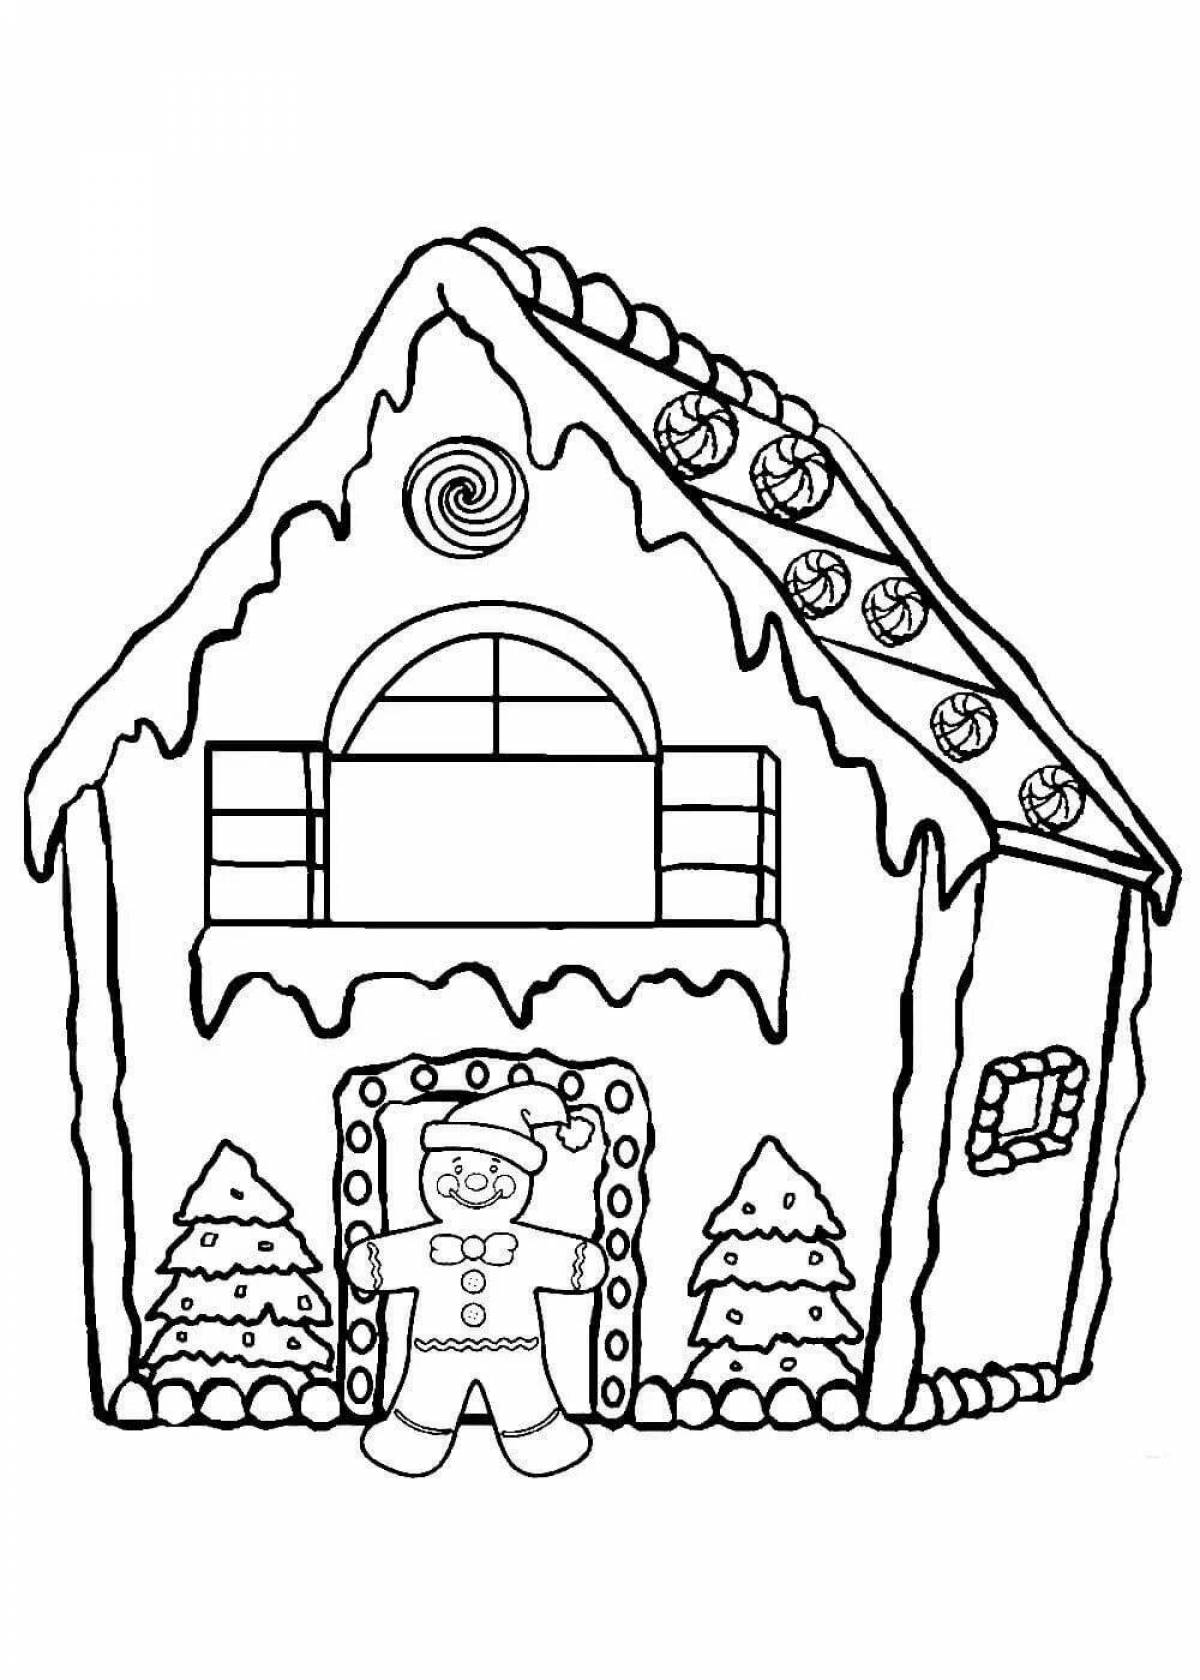 Coloring page nice beautiful house